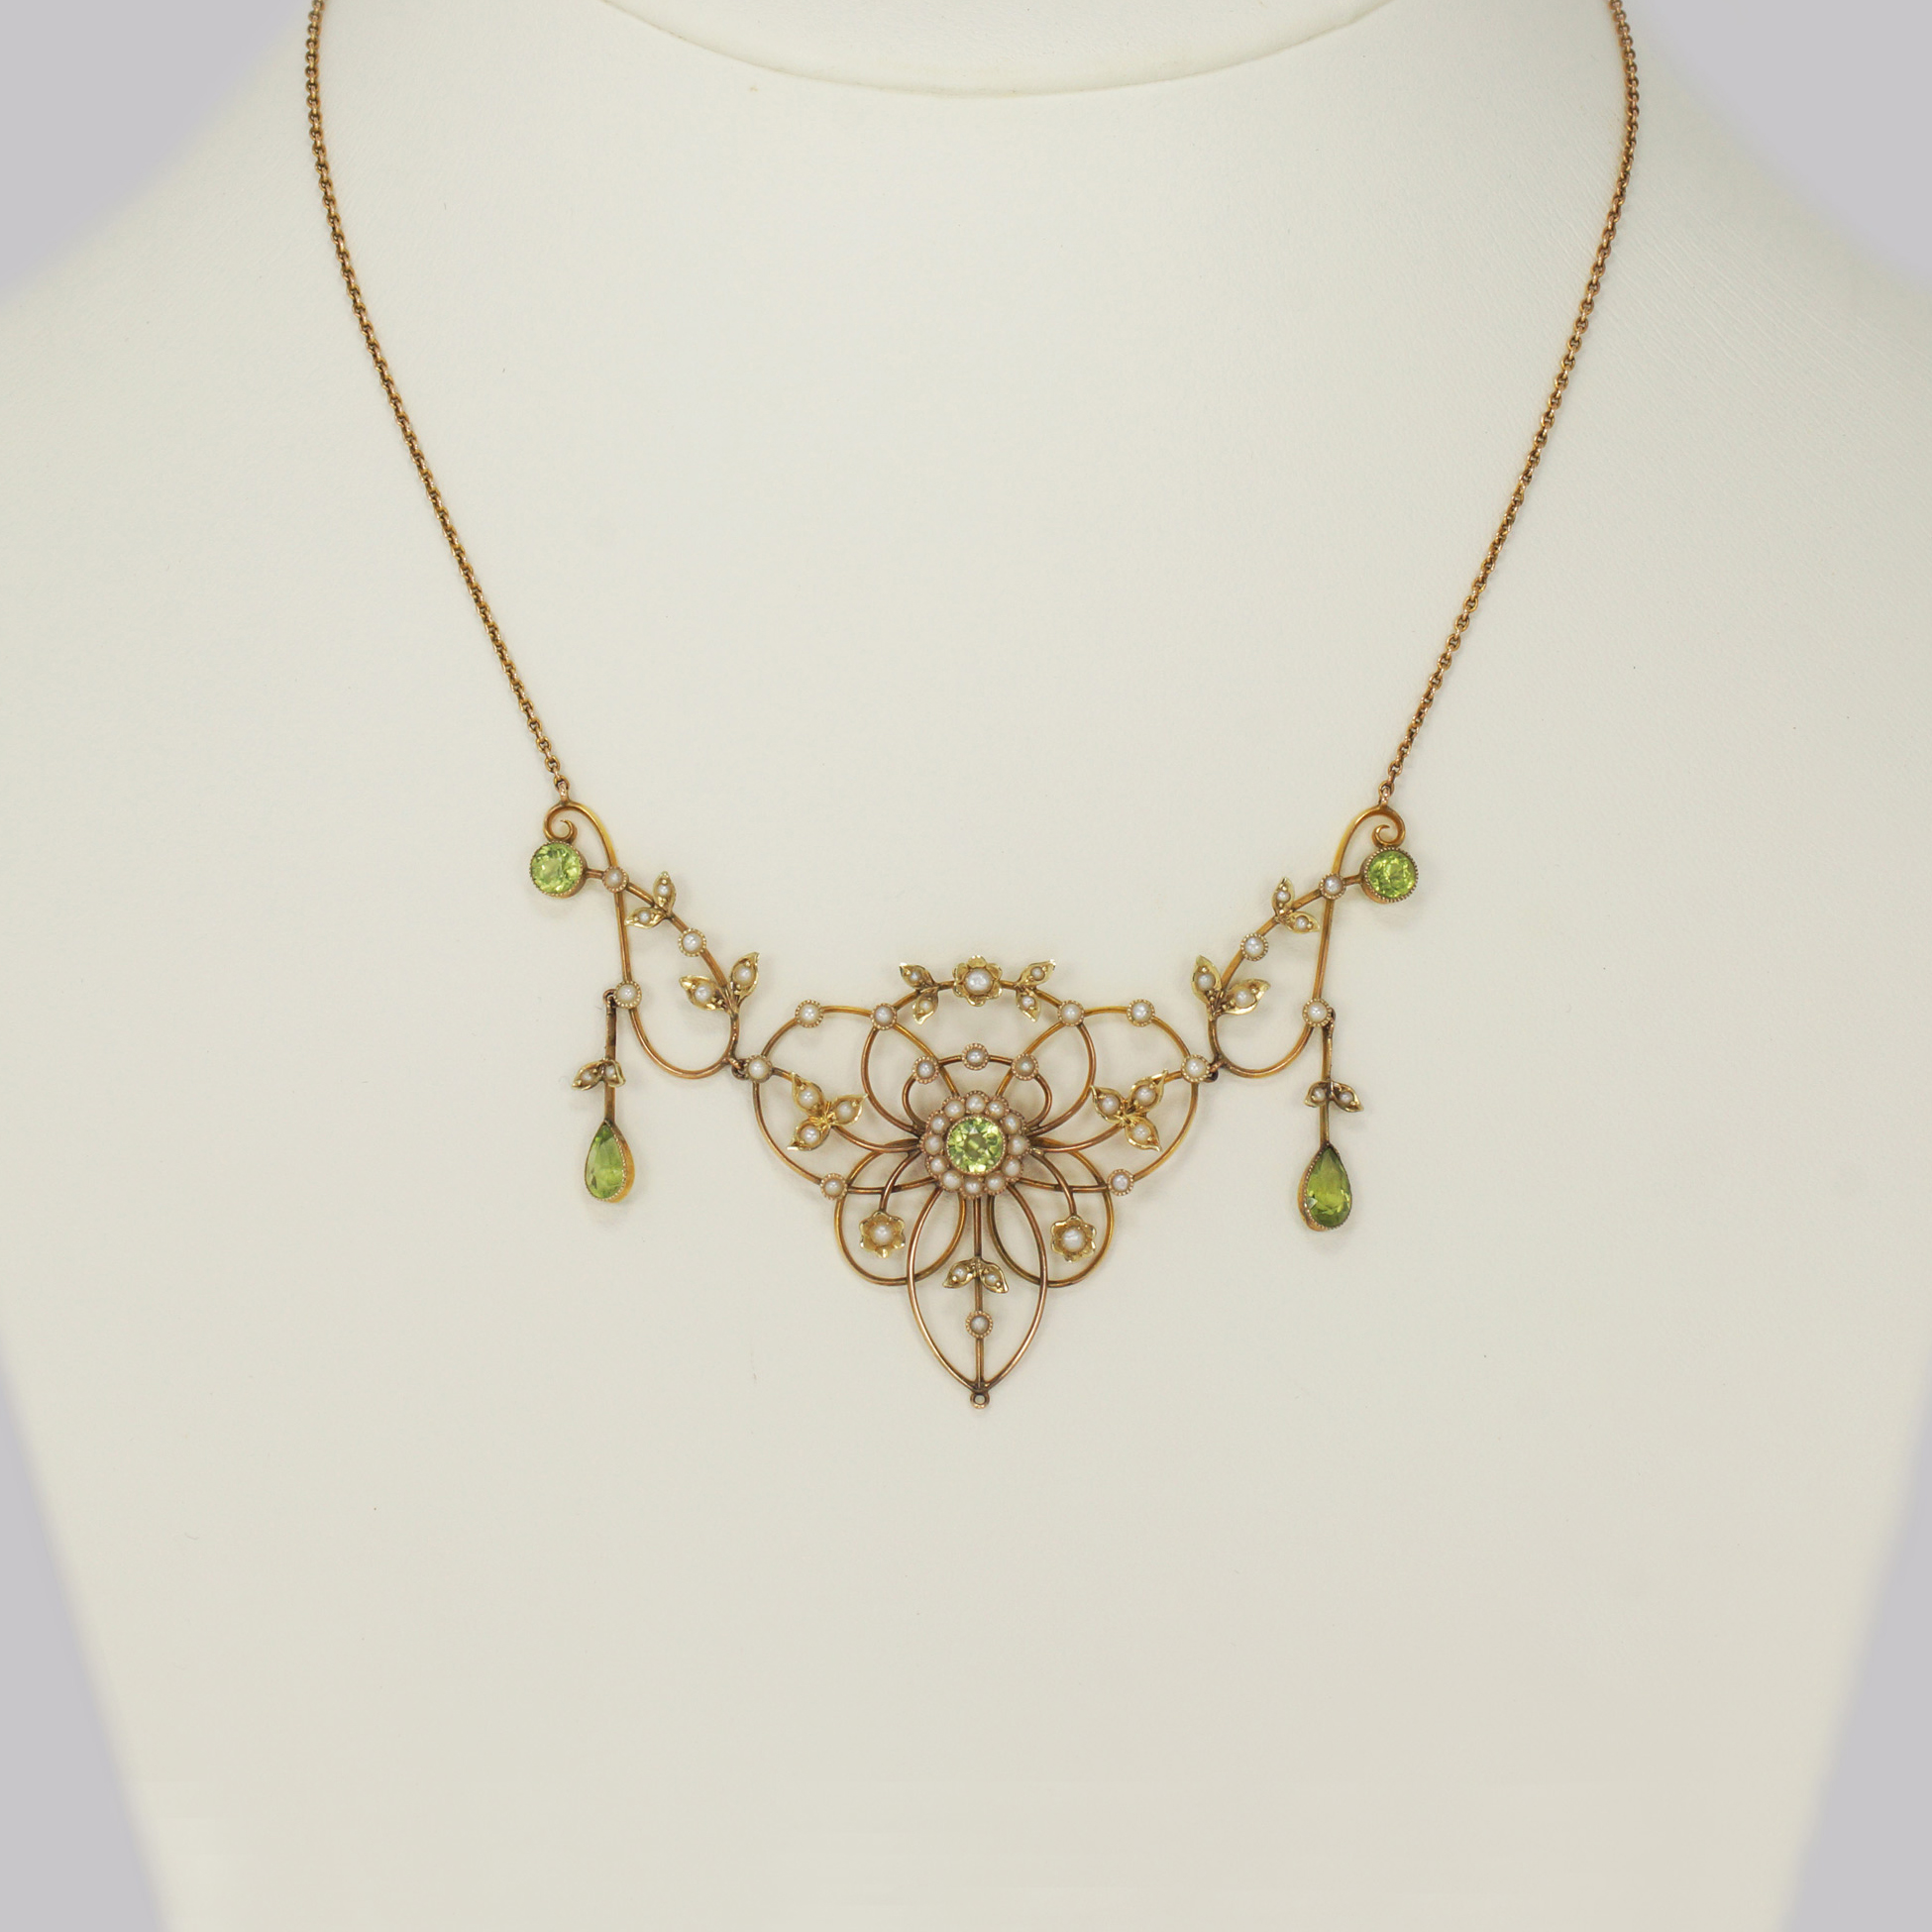 Antique Peridot & Pearl Necklace - The Chelsea Bijouterie